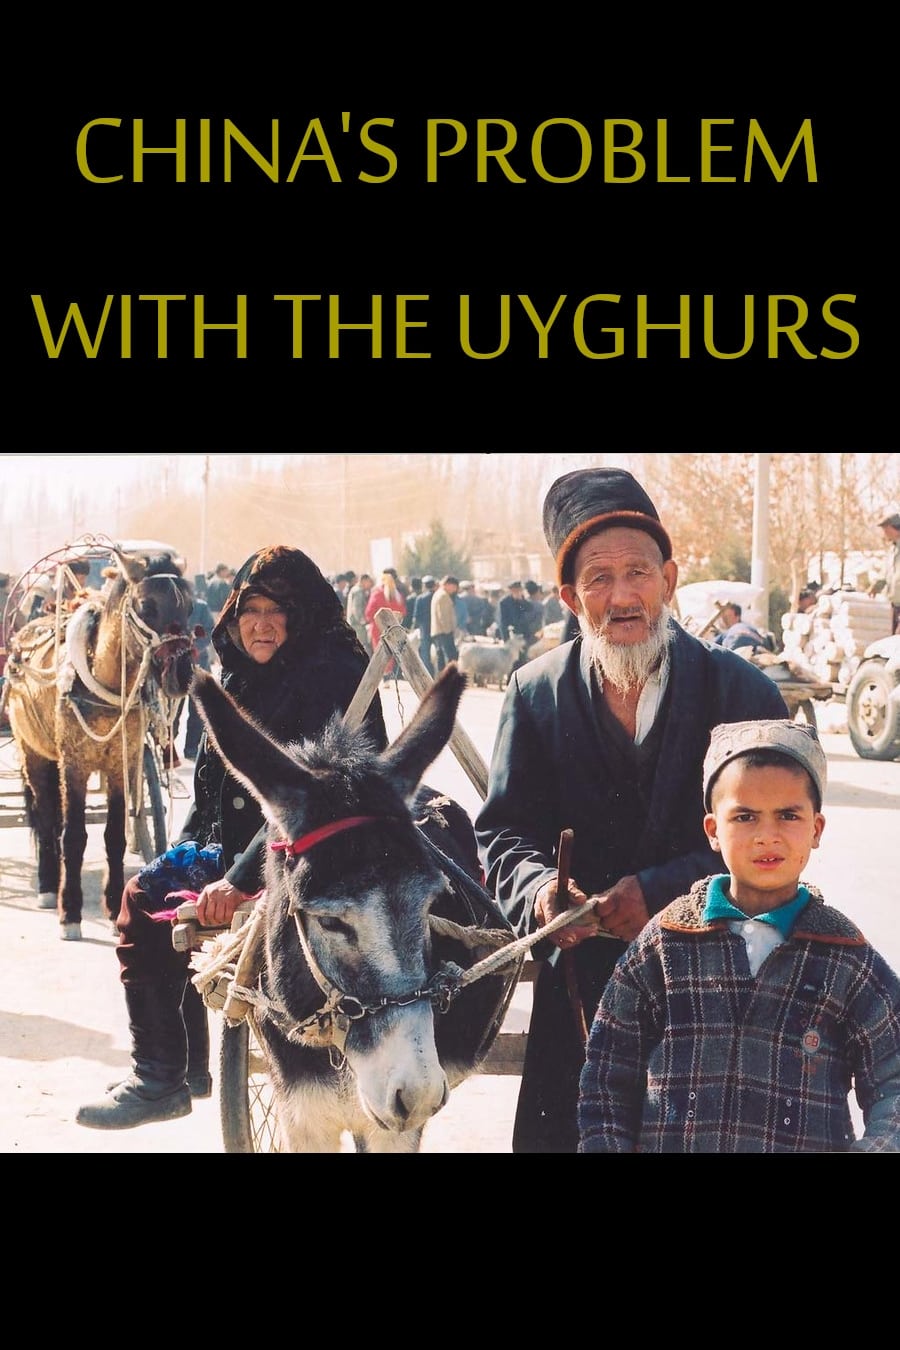 China's problems with the Uyghurs